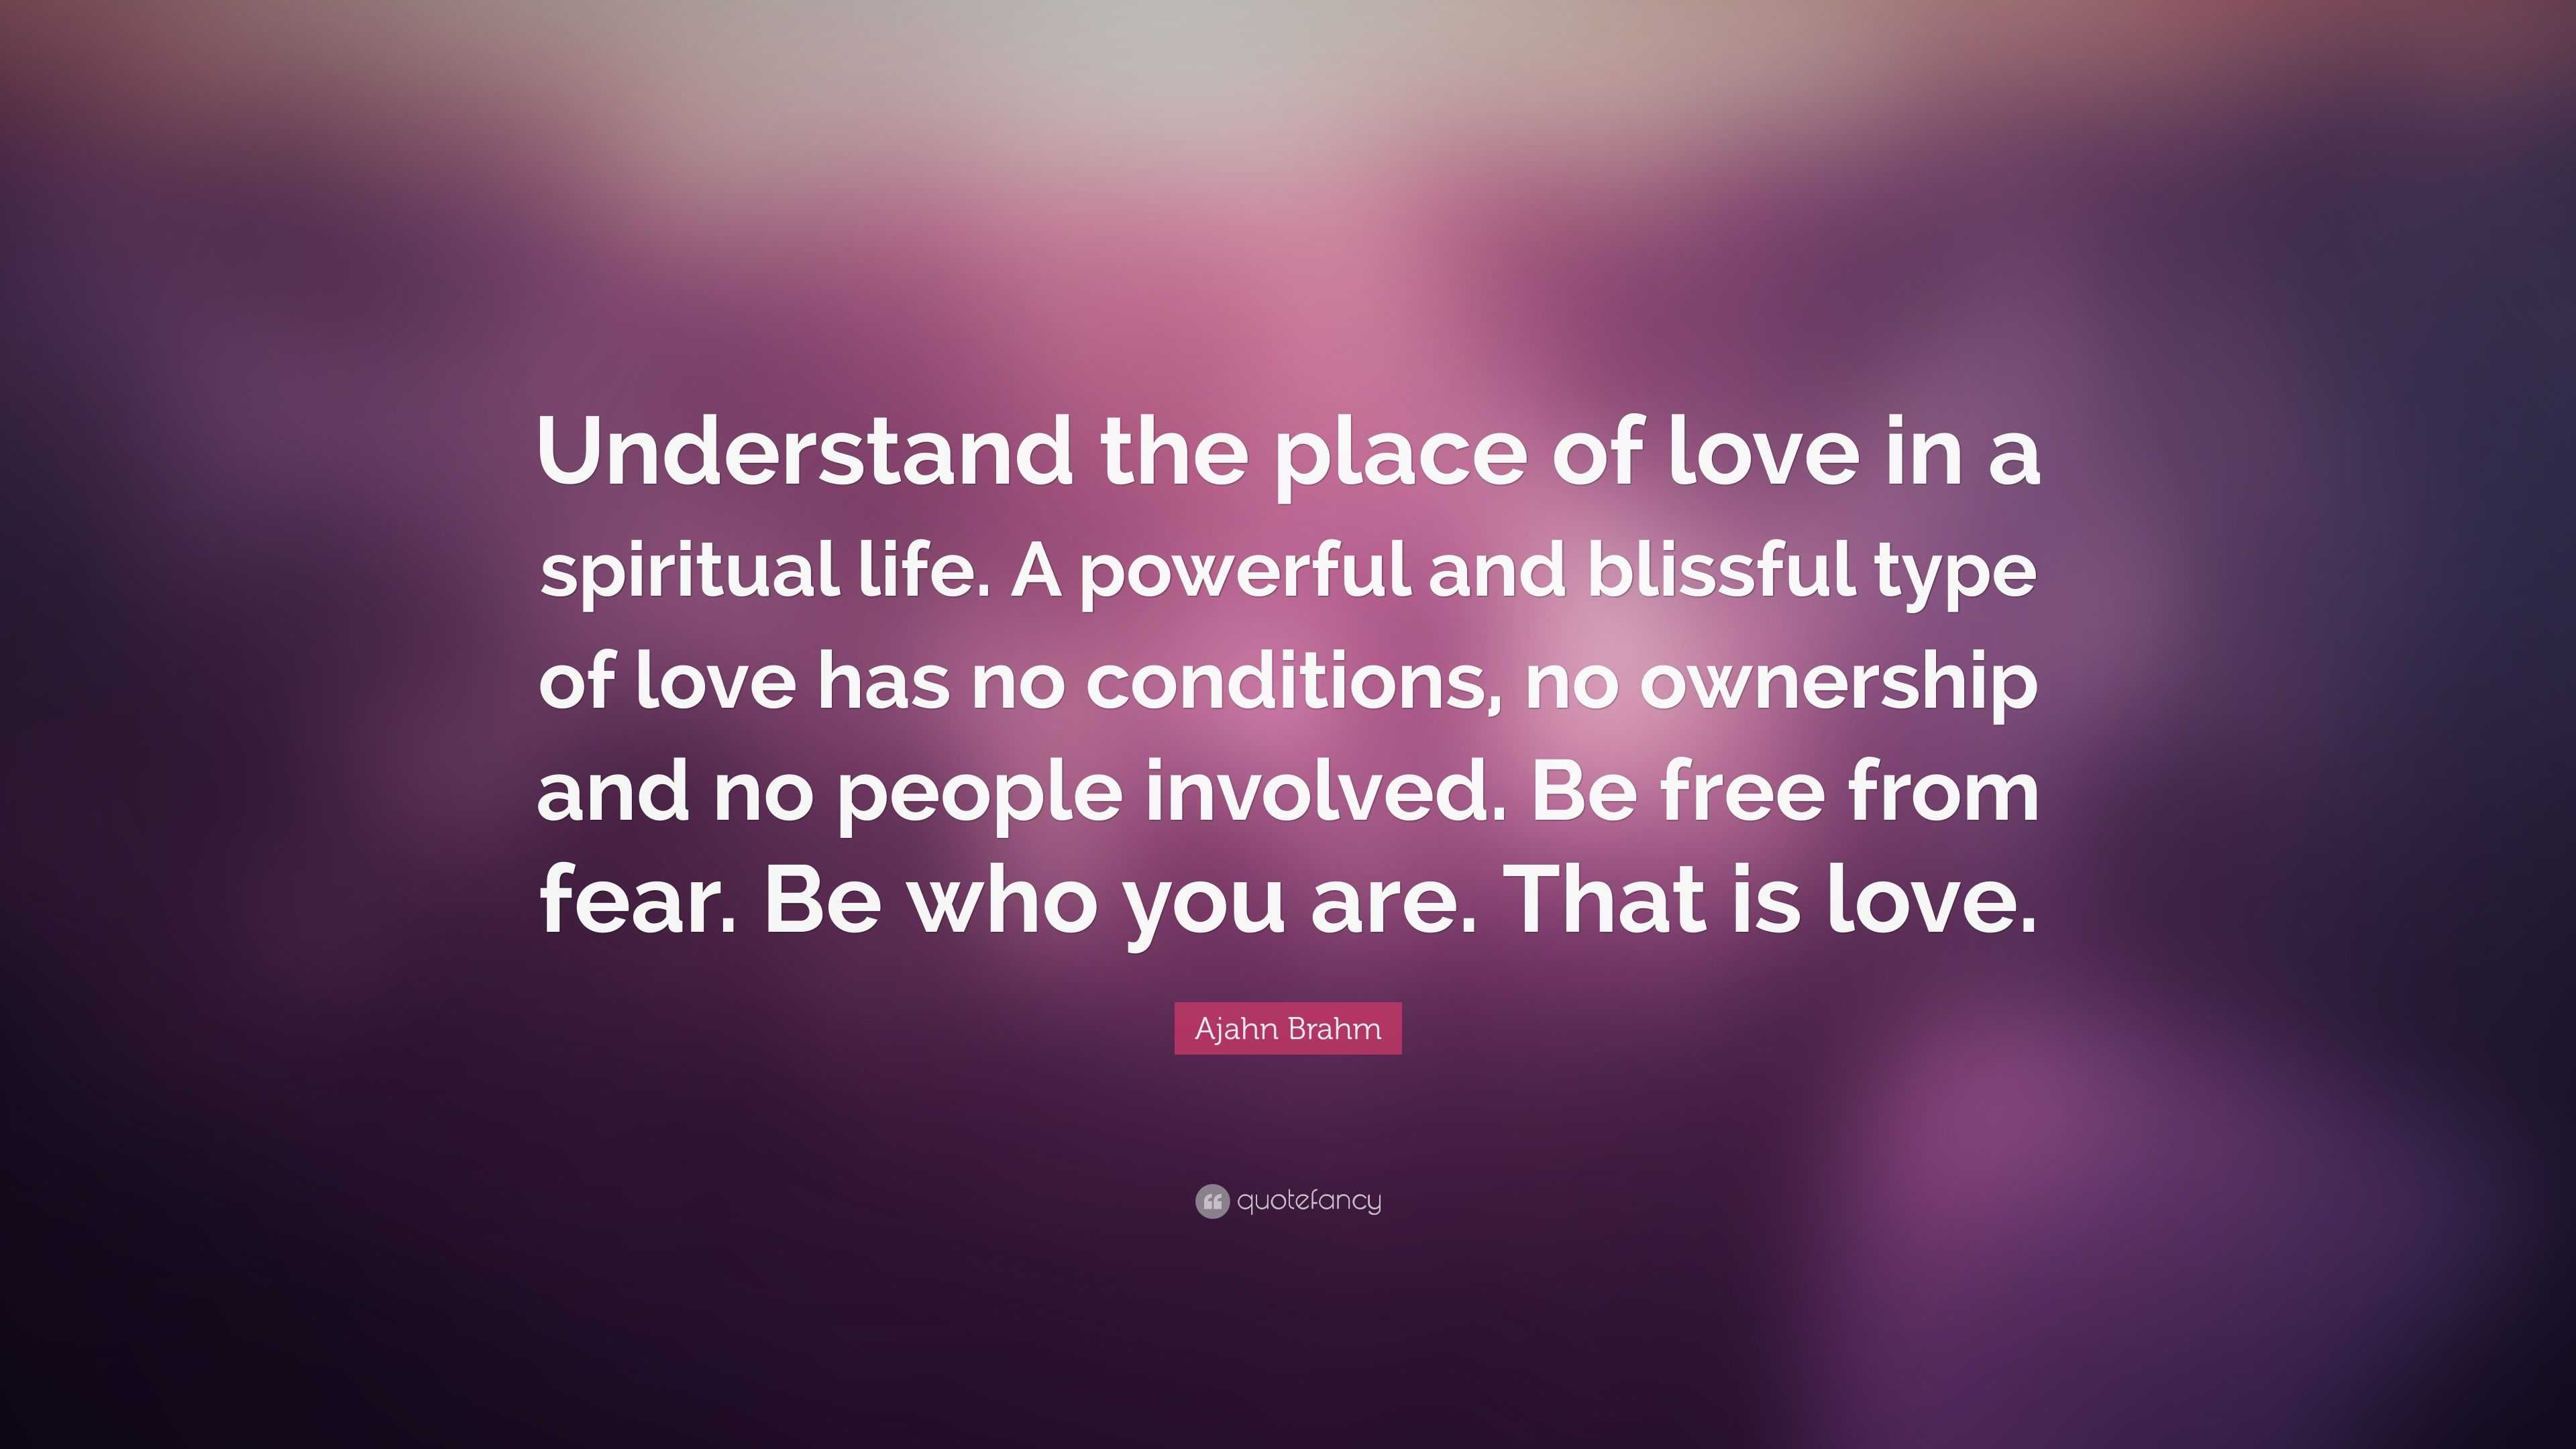 Ajahn Brahm Quote “Understand the place of love in a spiritual life A